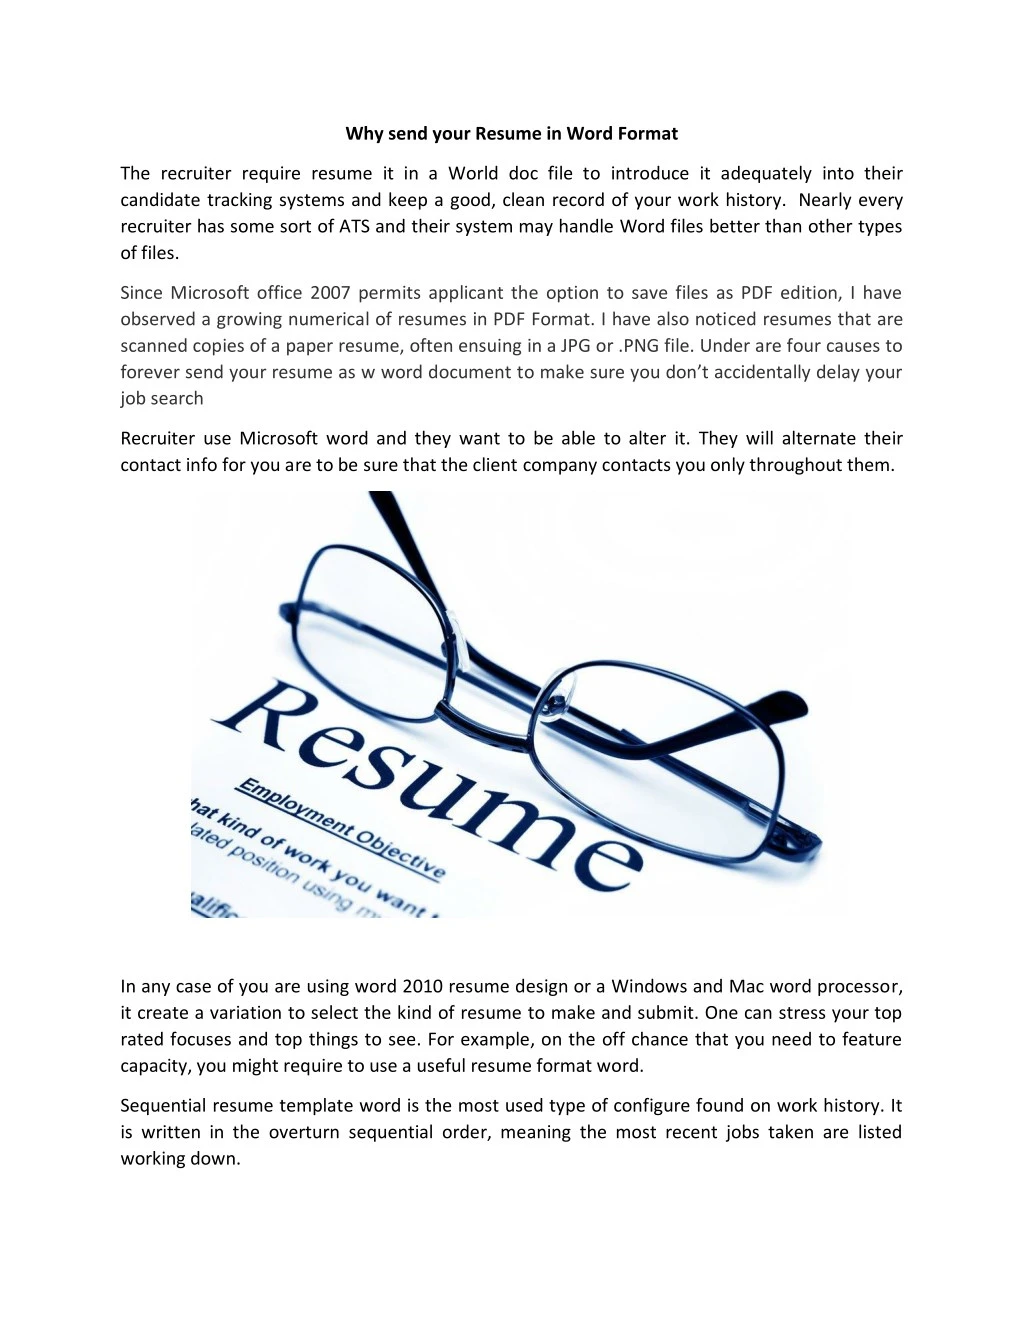 why send your resume in word format